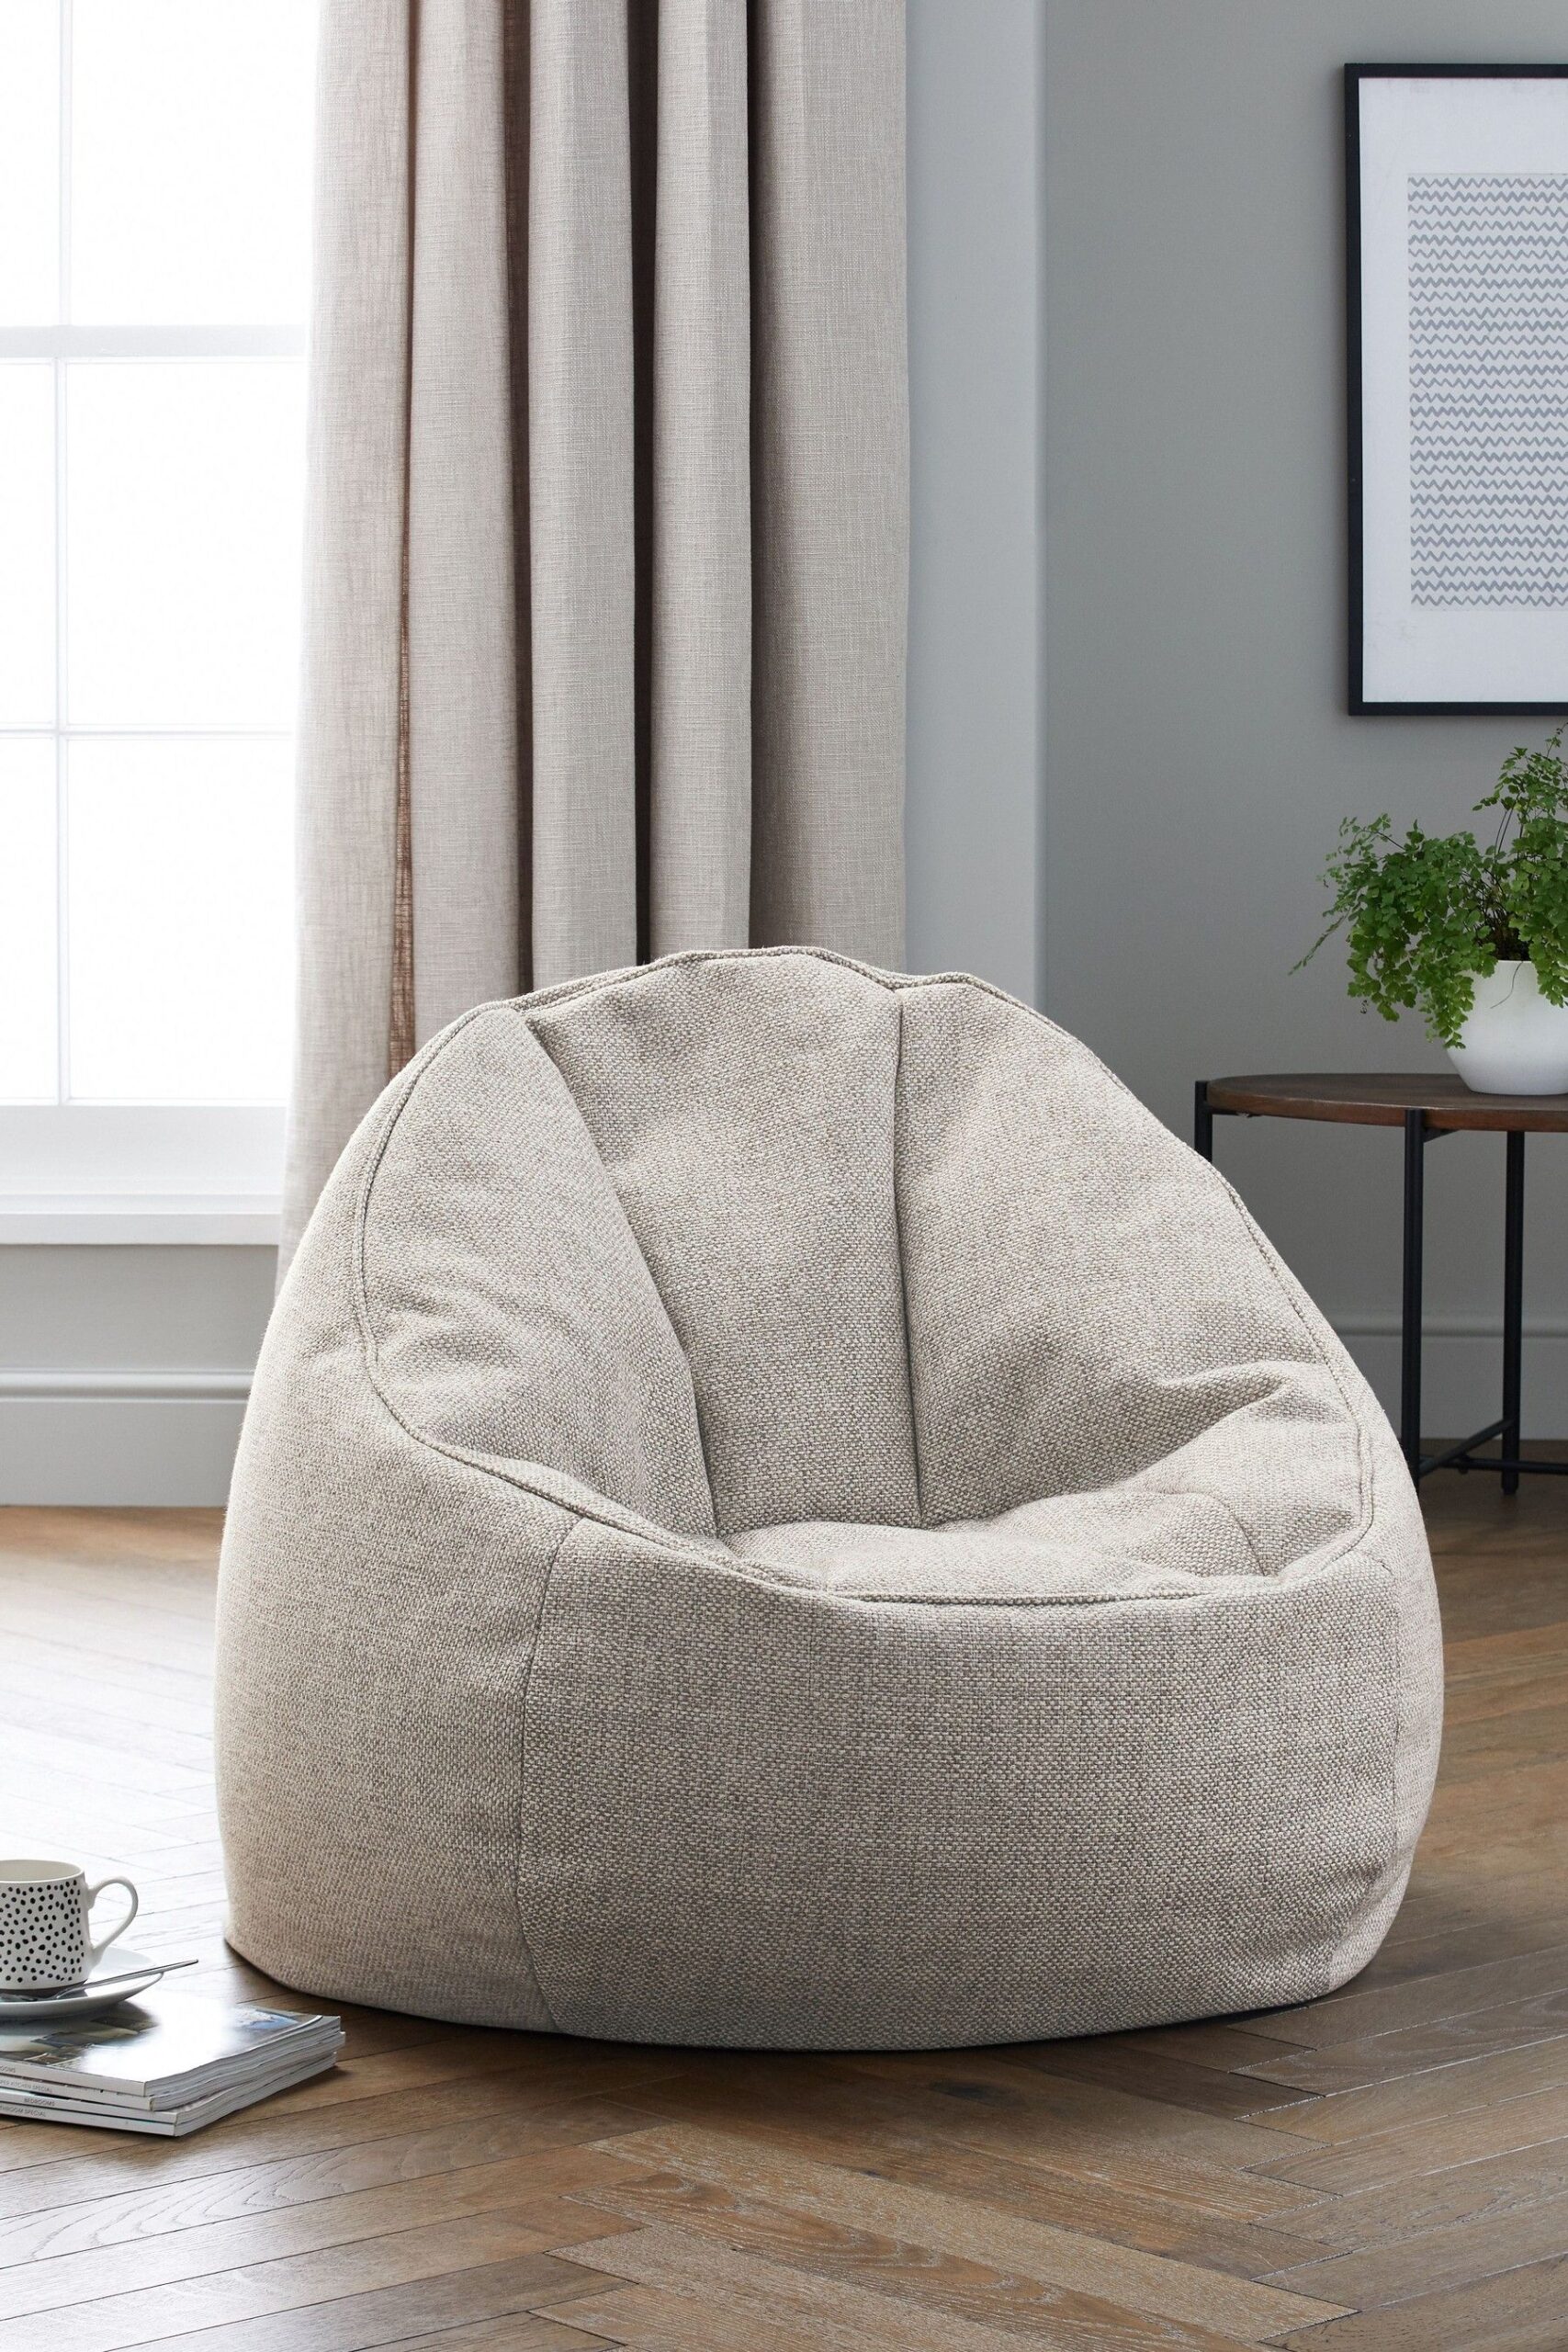 Creative Ways to Style Your Bean Bag
Chair